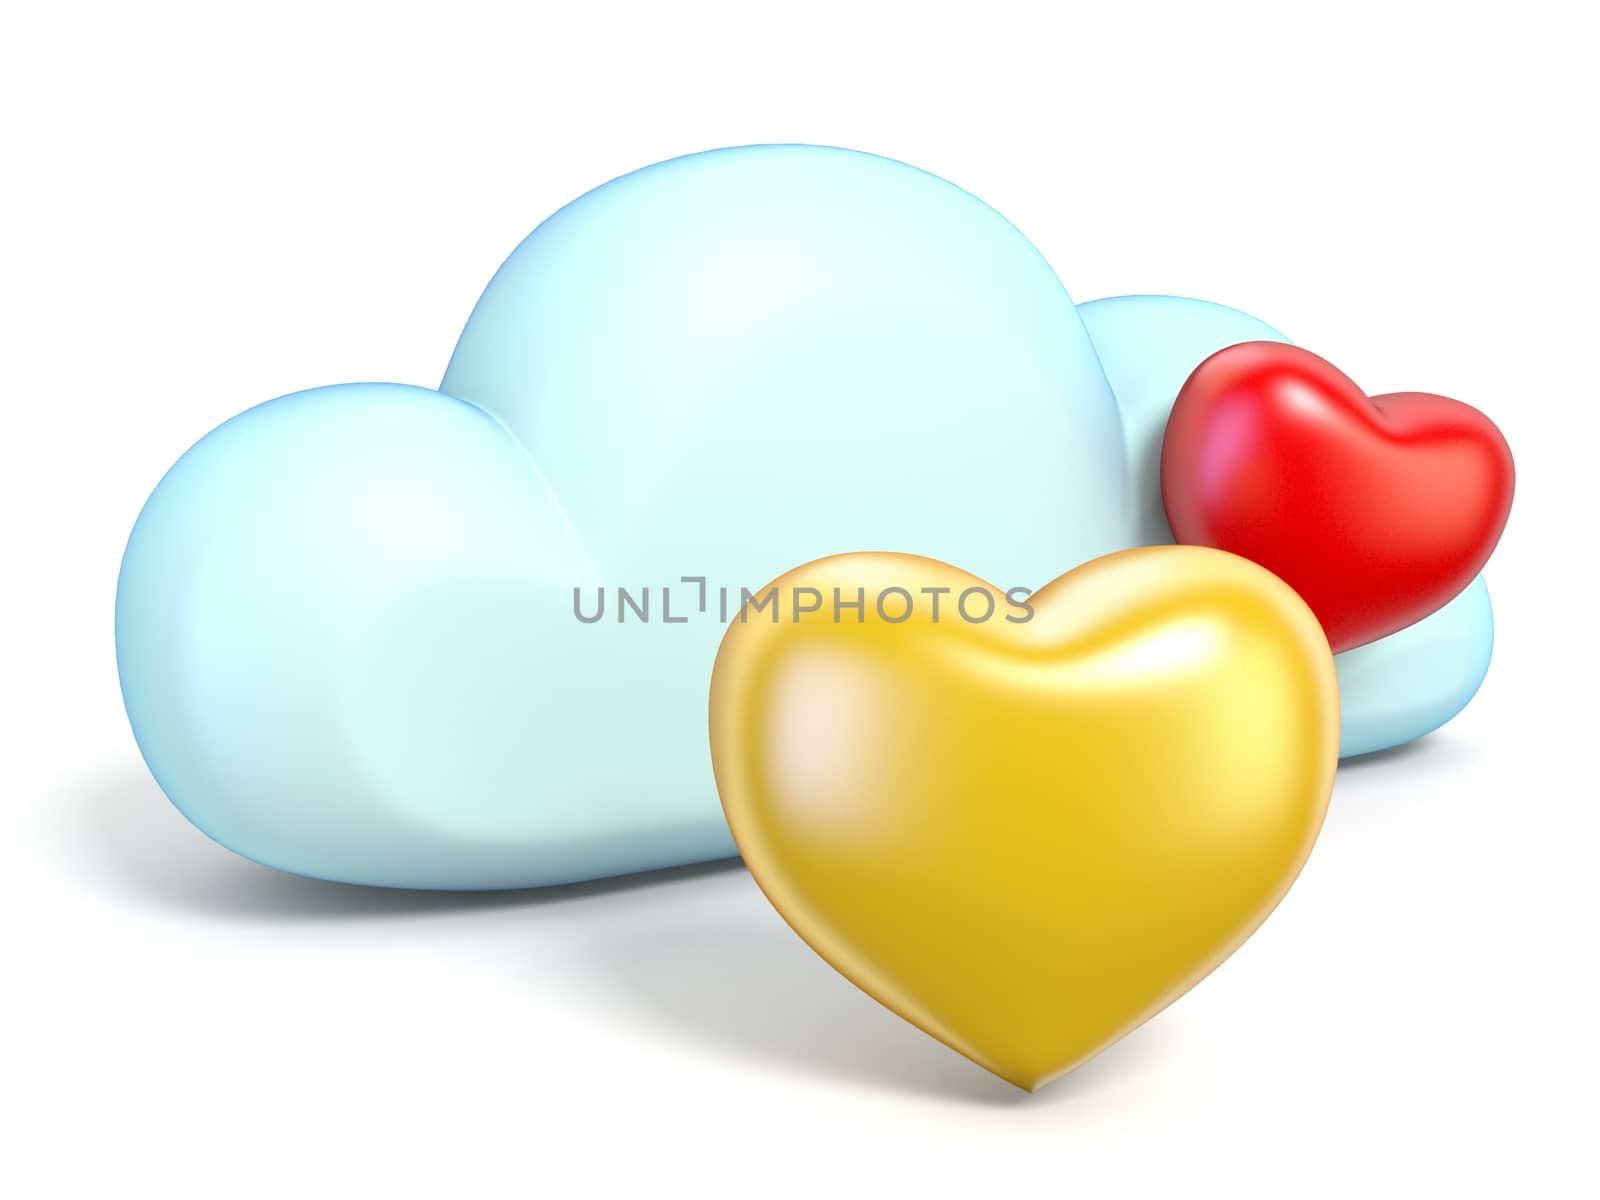 Cloud icon with hearts 3D rendering isolated on white background